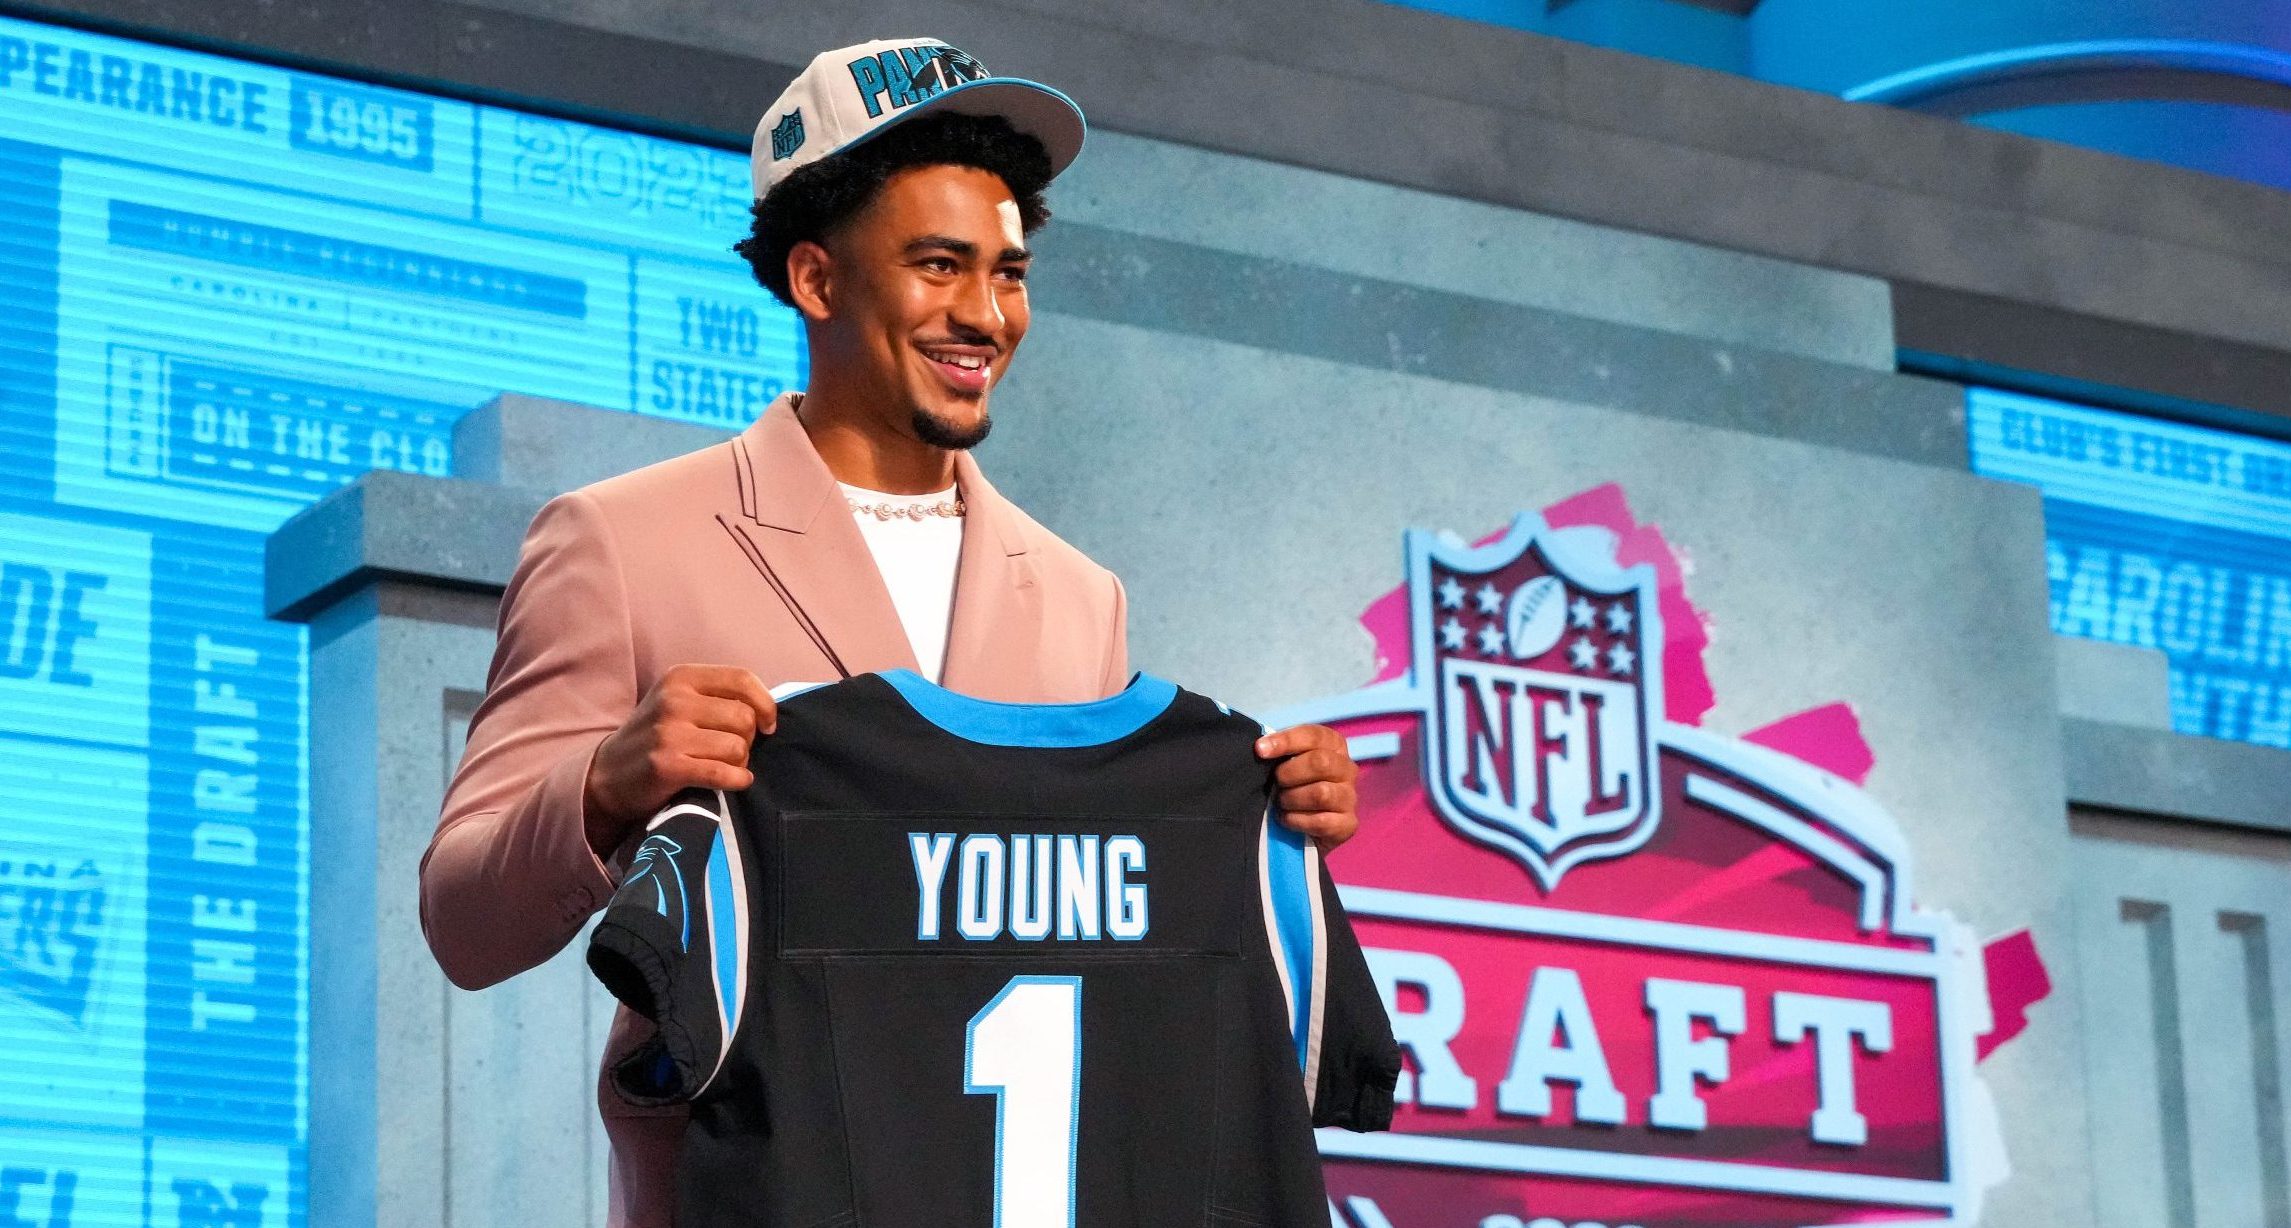 Alabama quarterback Bryce Young on stage after he was drafted first overall by the Carolina Panthers